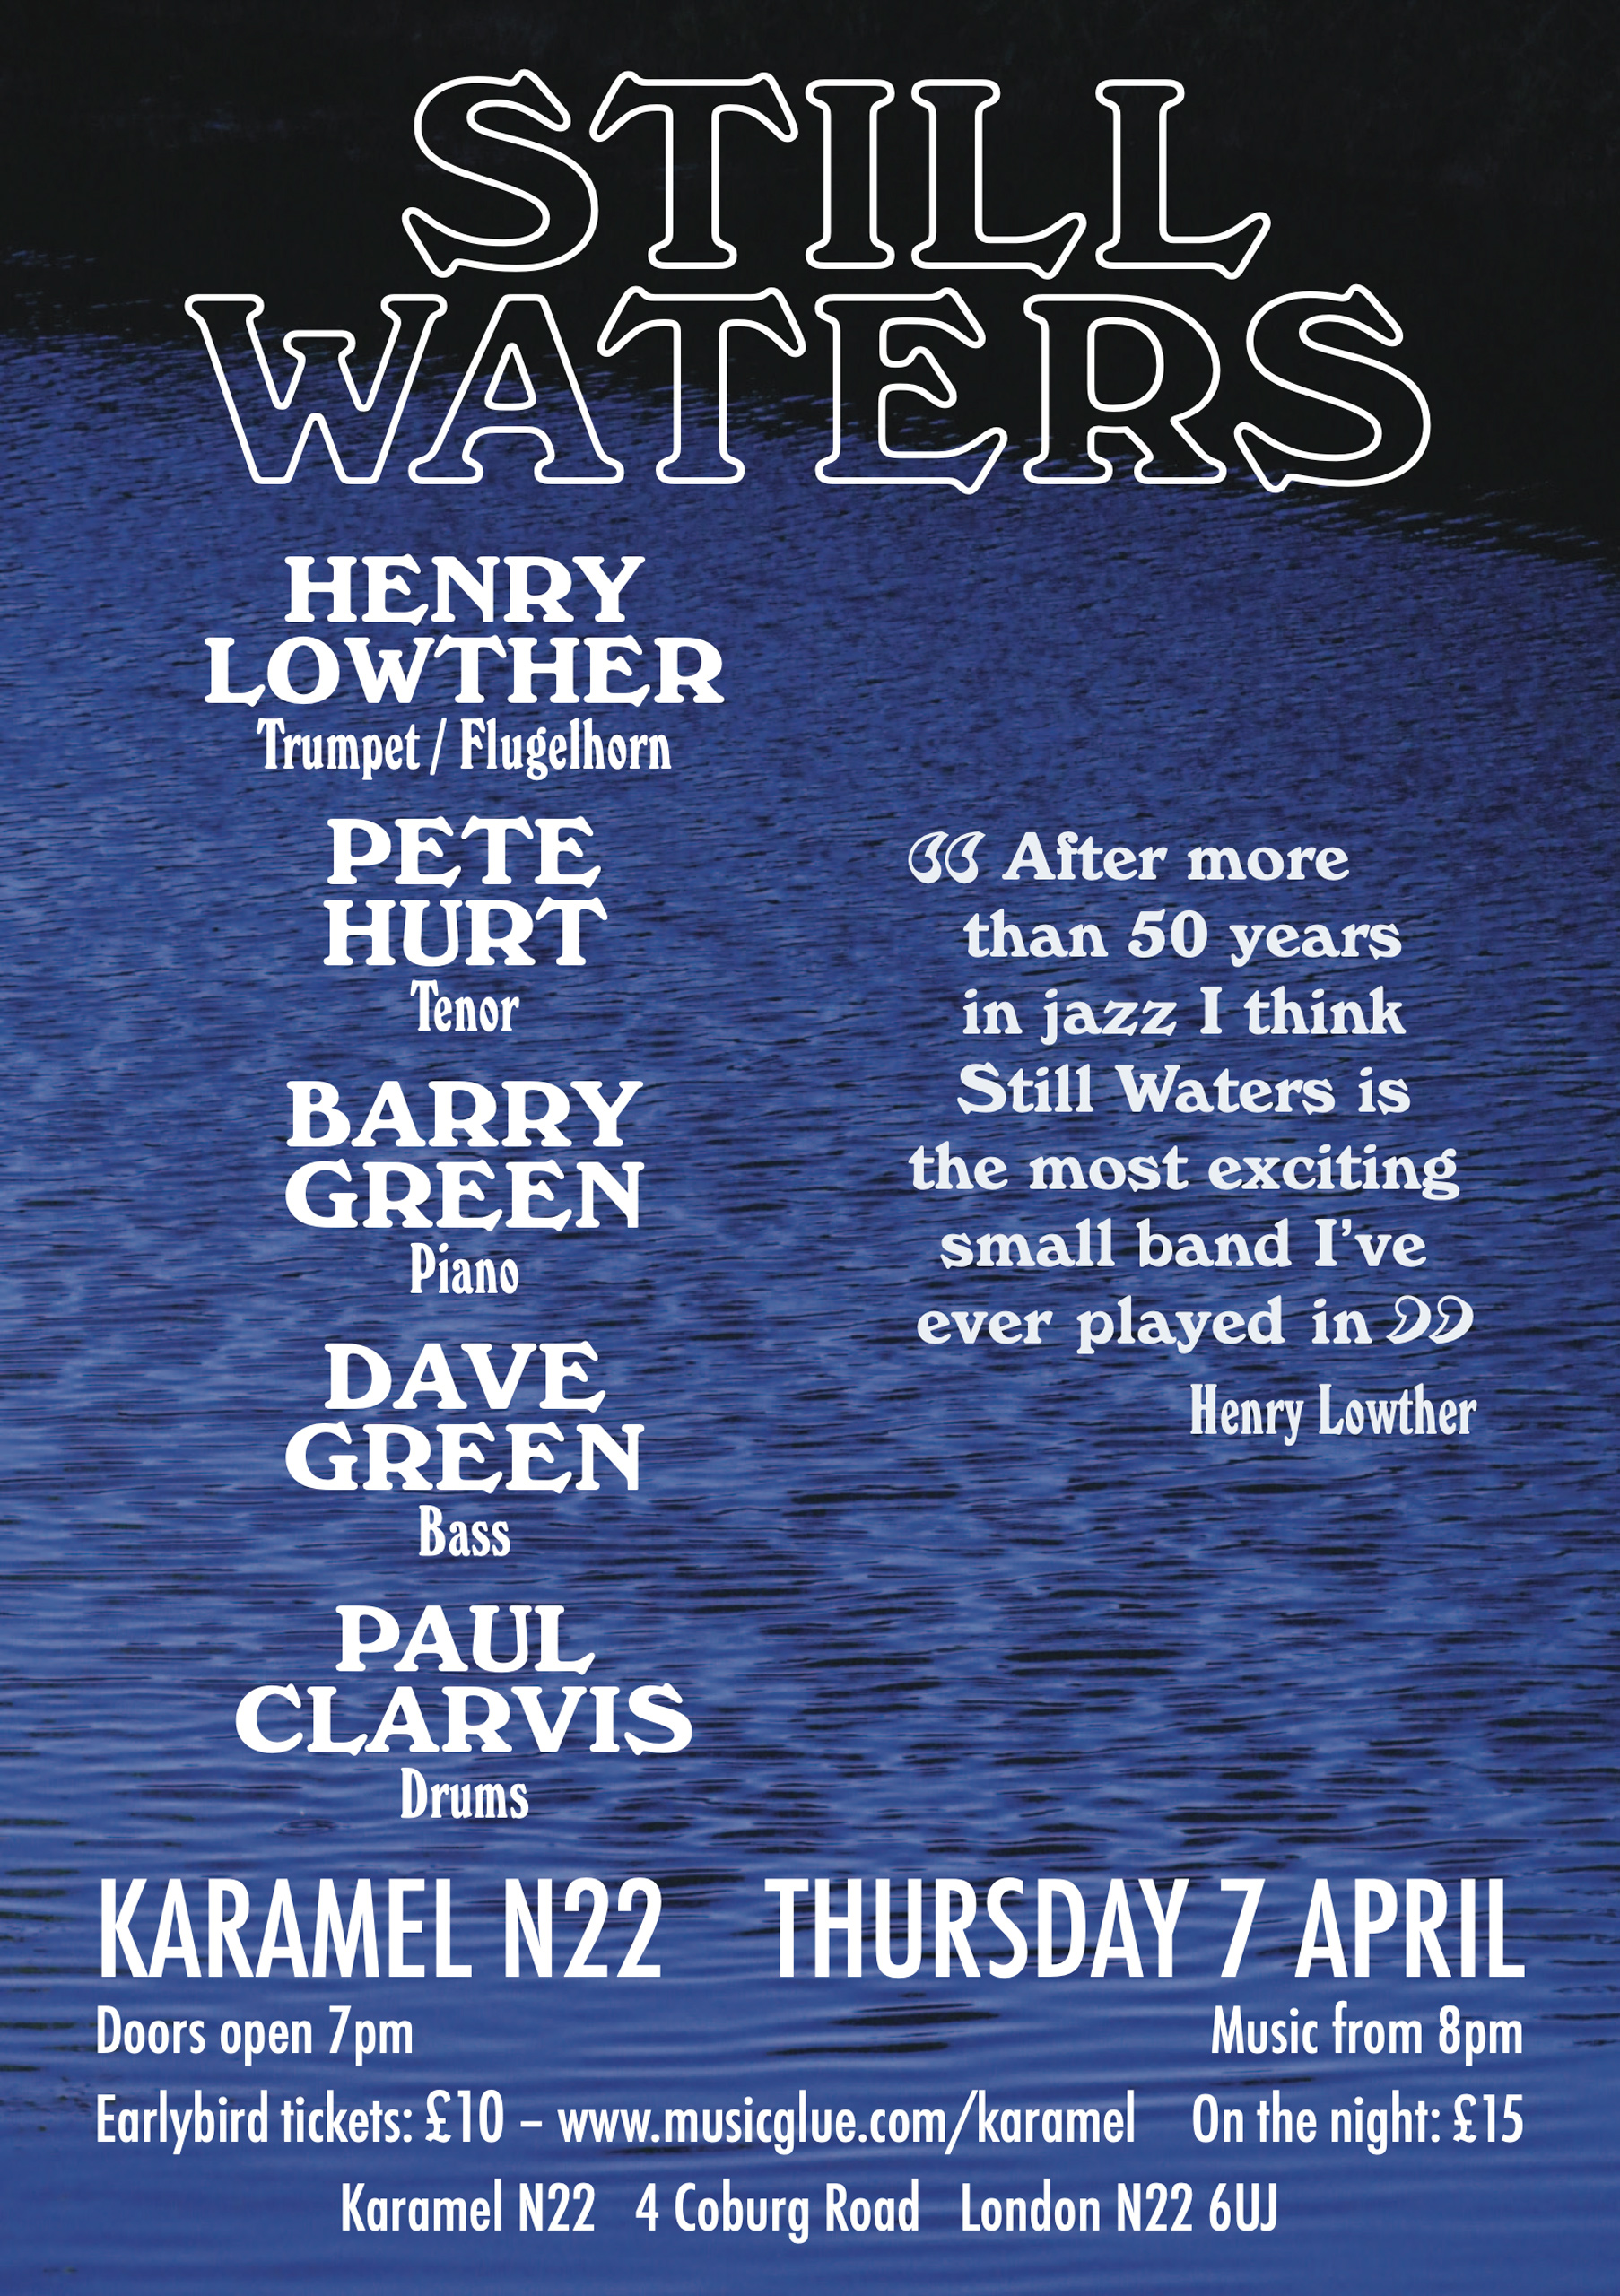 Still Waters Poster